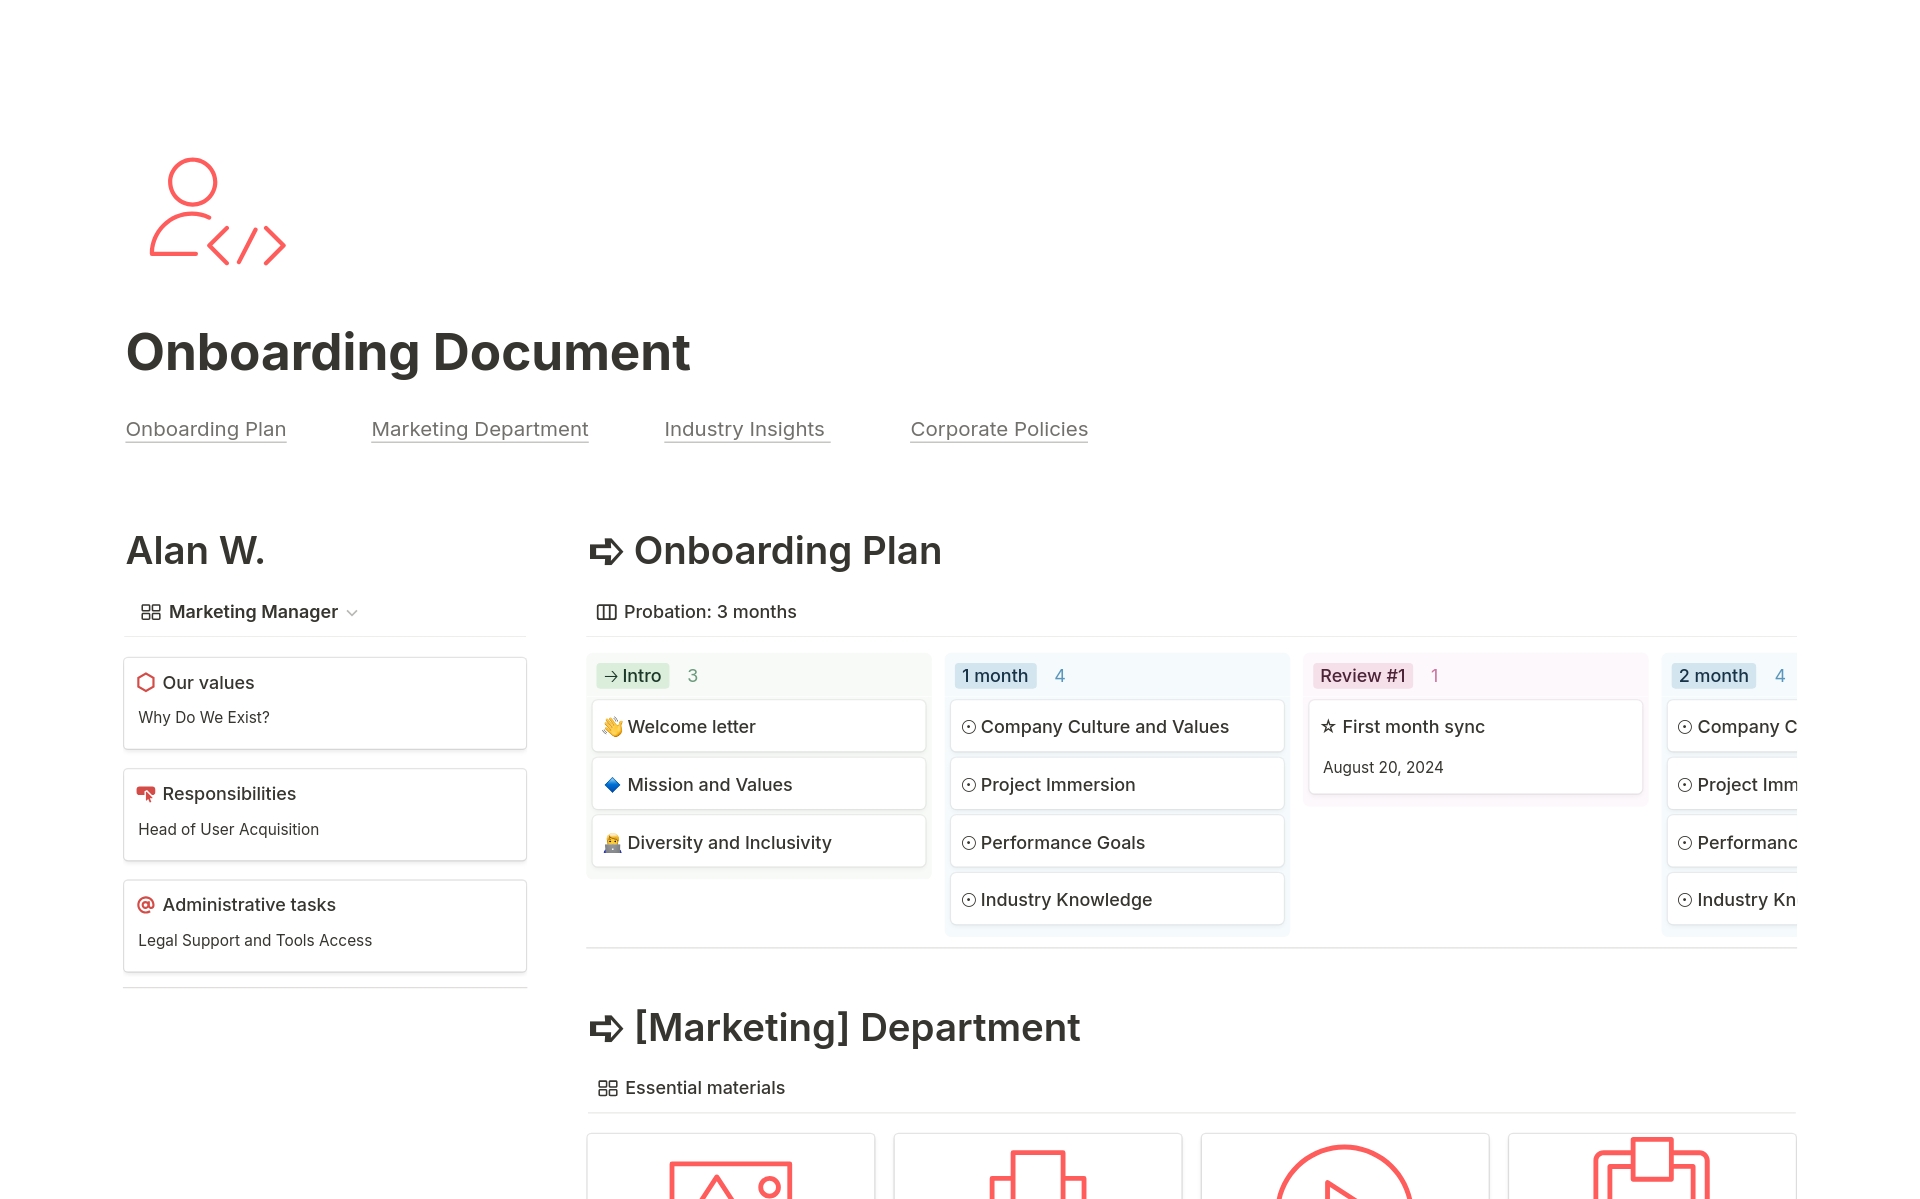 ✨ Convenient and comprehensive onboarding document that helps newcomers, managers, and HR stay on the same page and not miss a single detail.